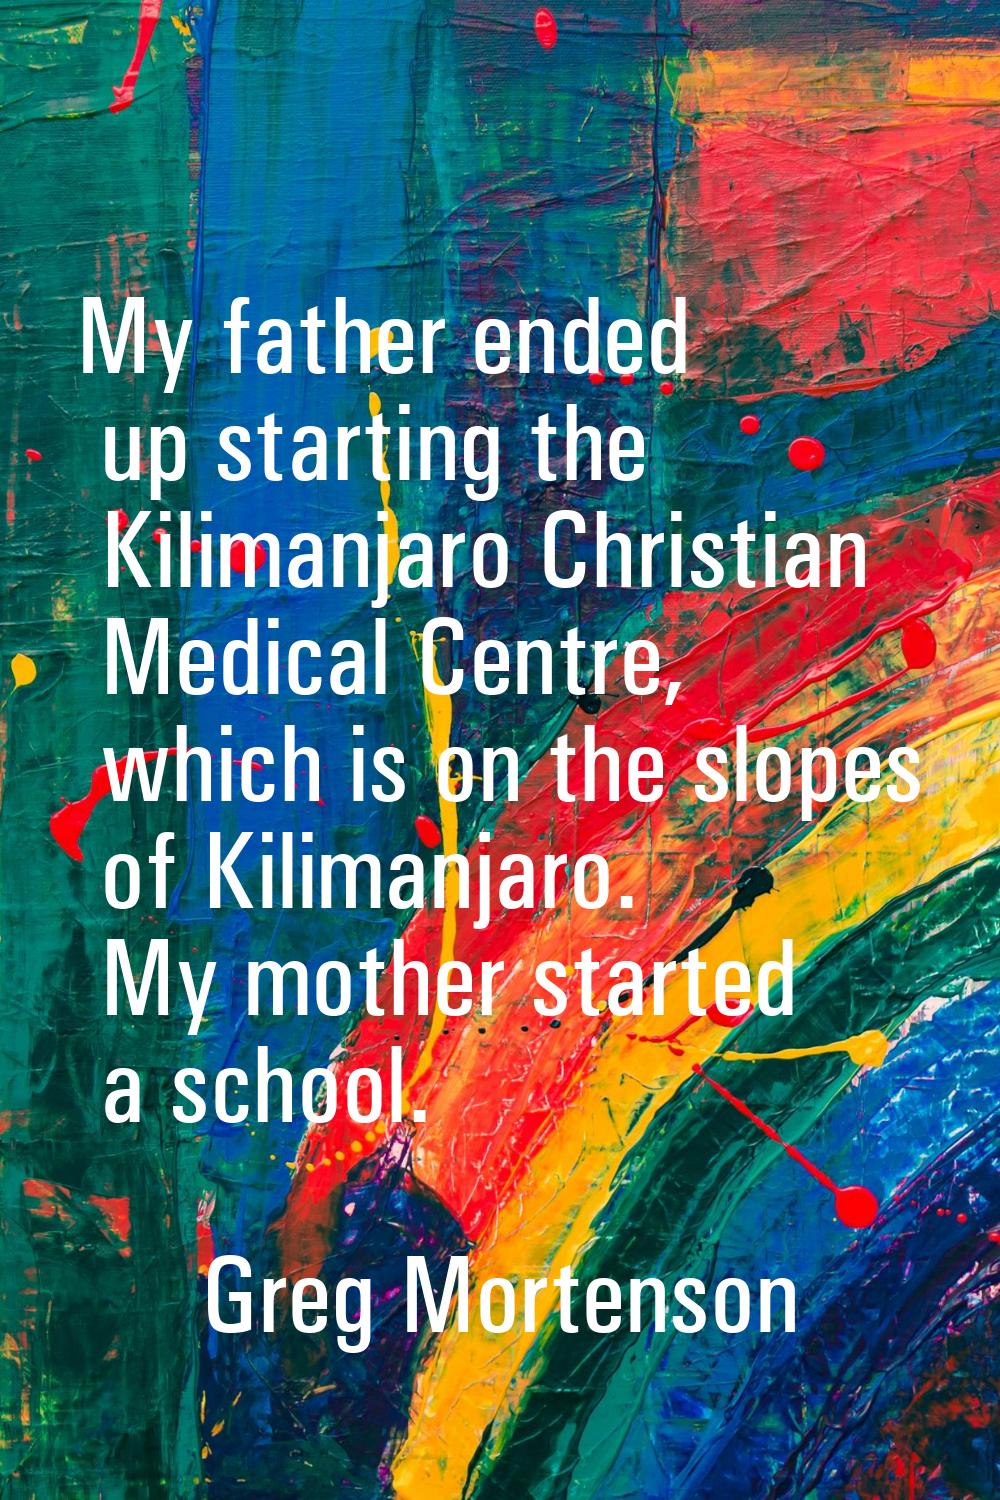 My father ended up starting the Kilimanjaro Christian Medical Centre, which is on the slopes of Kil